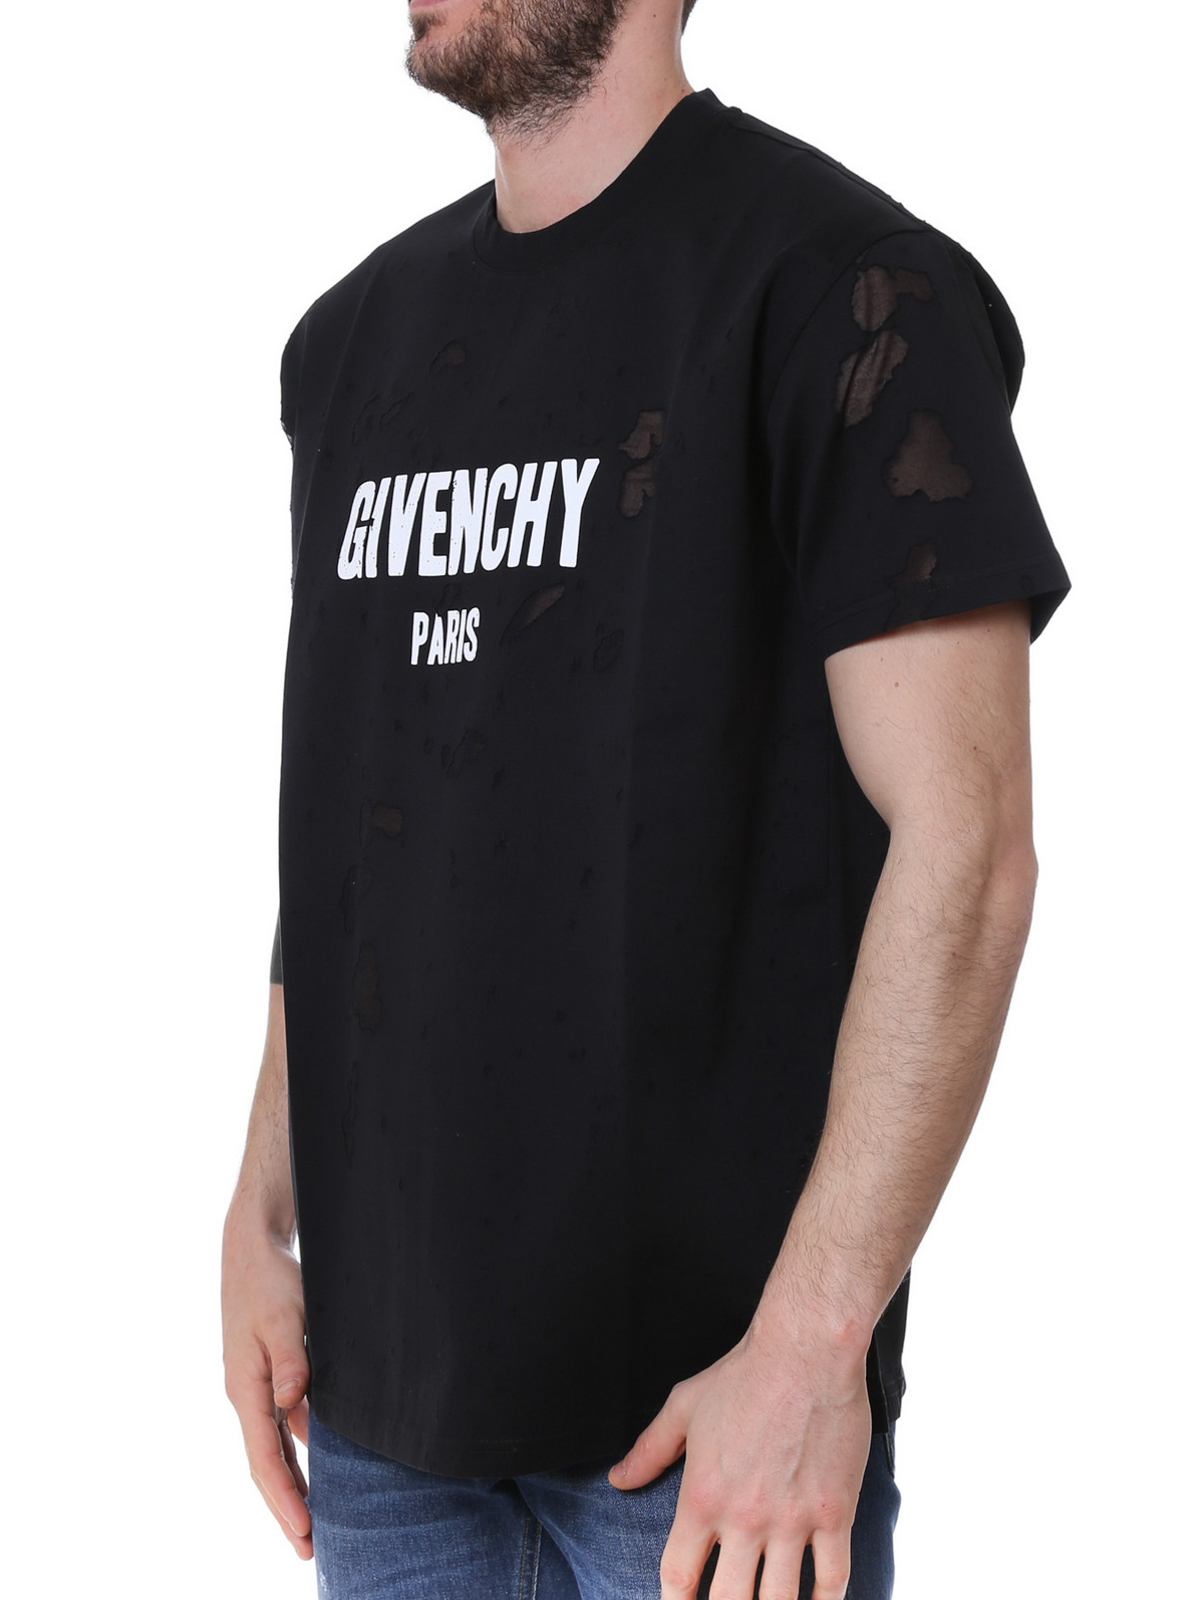 givenchy shirts online